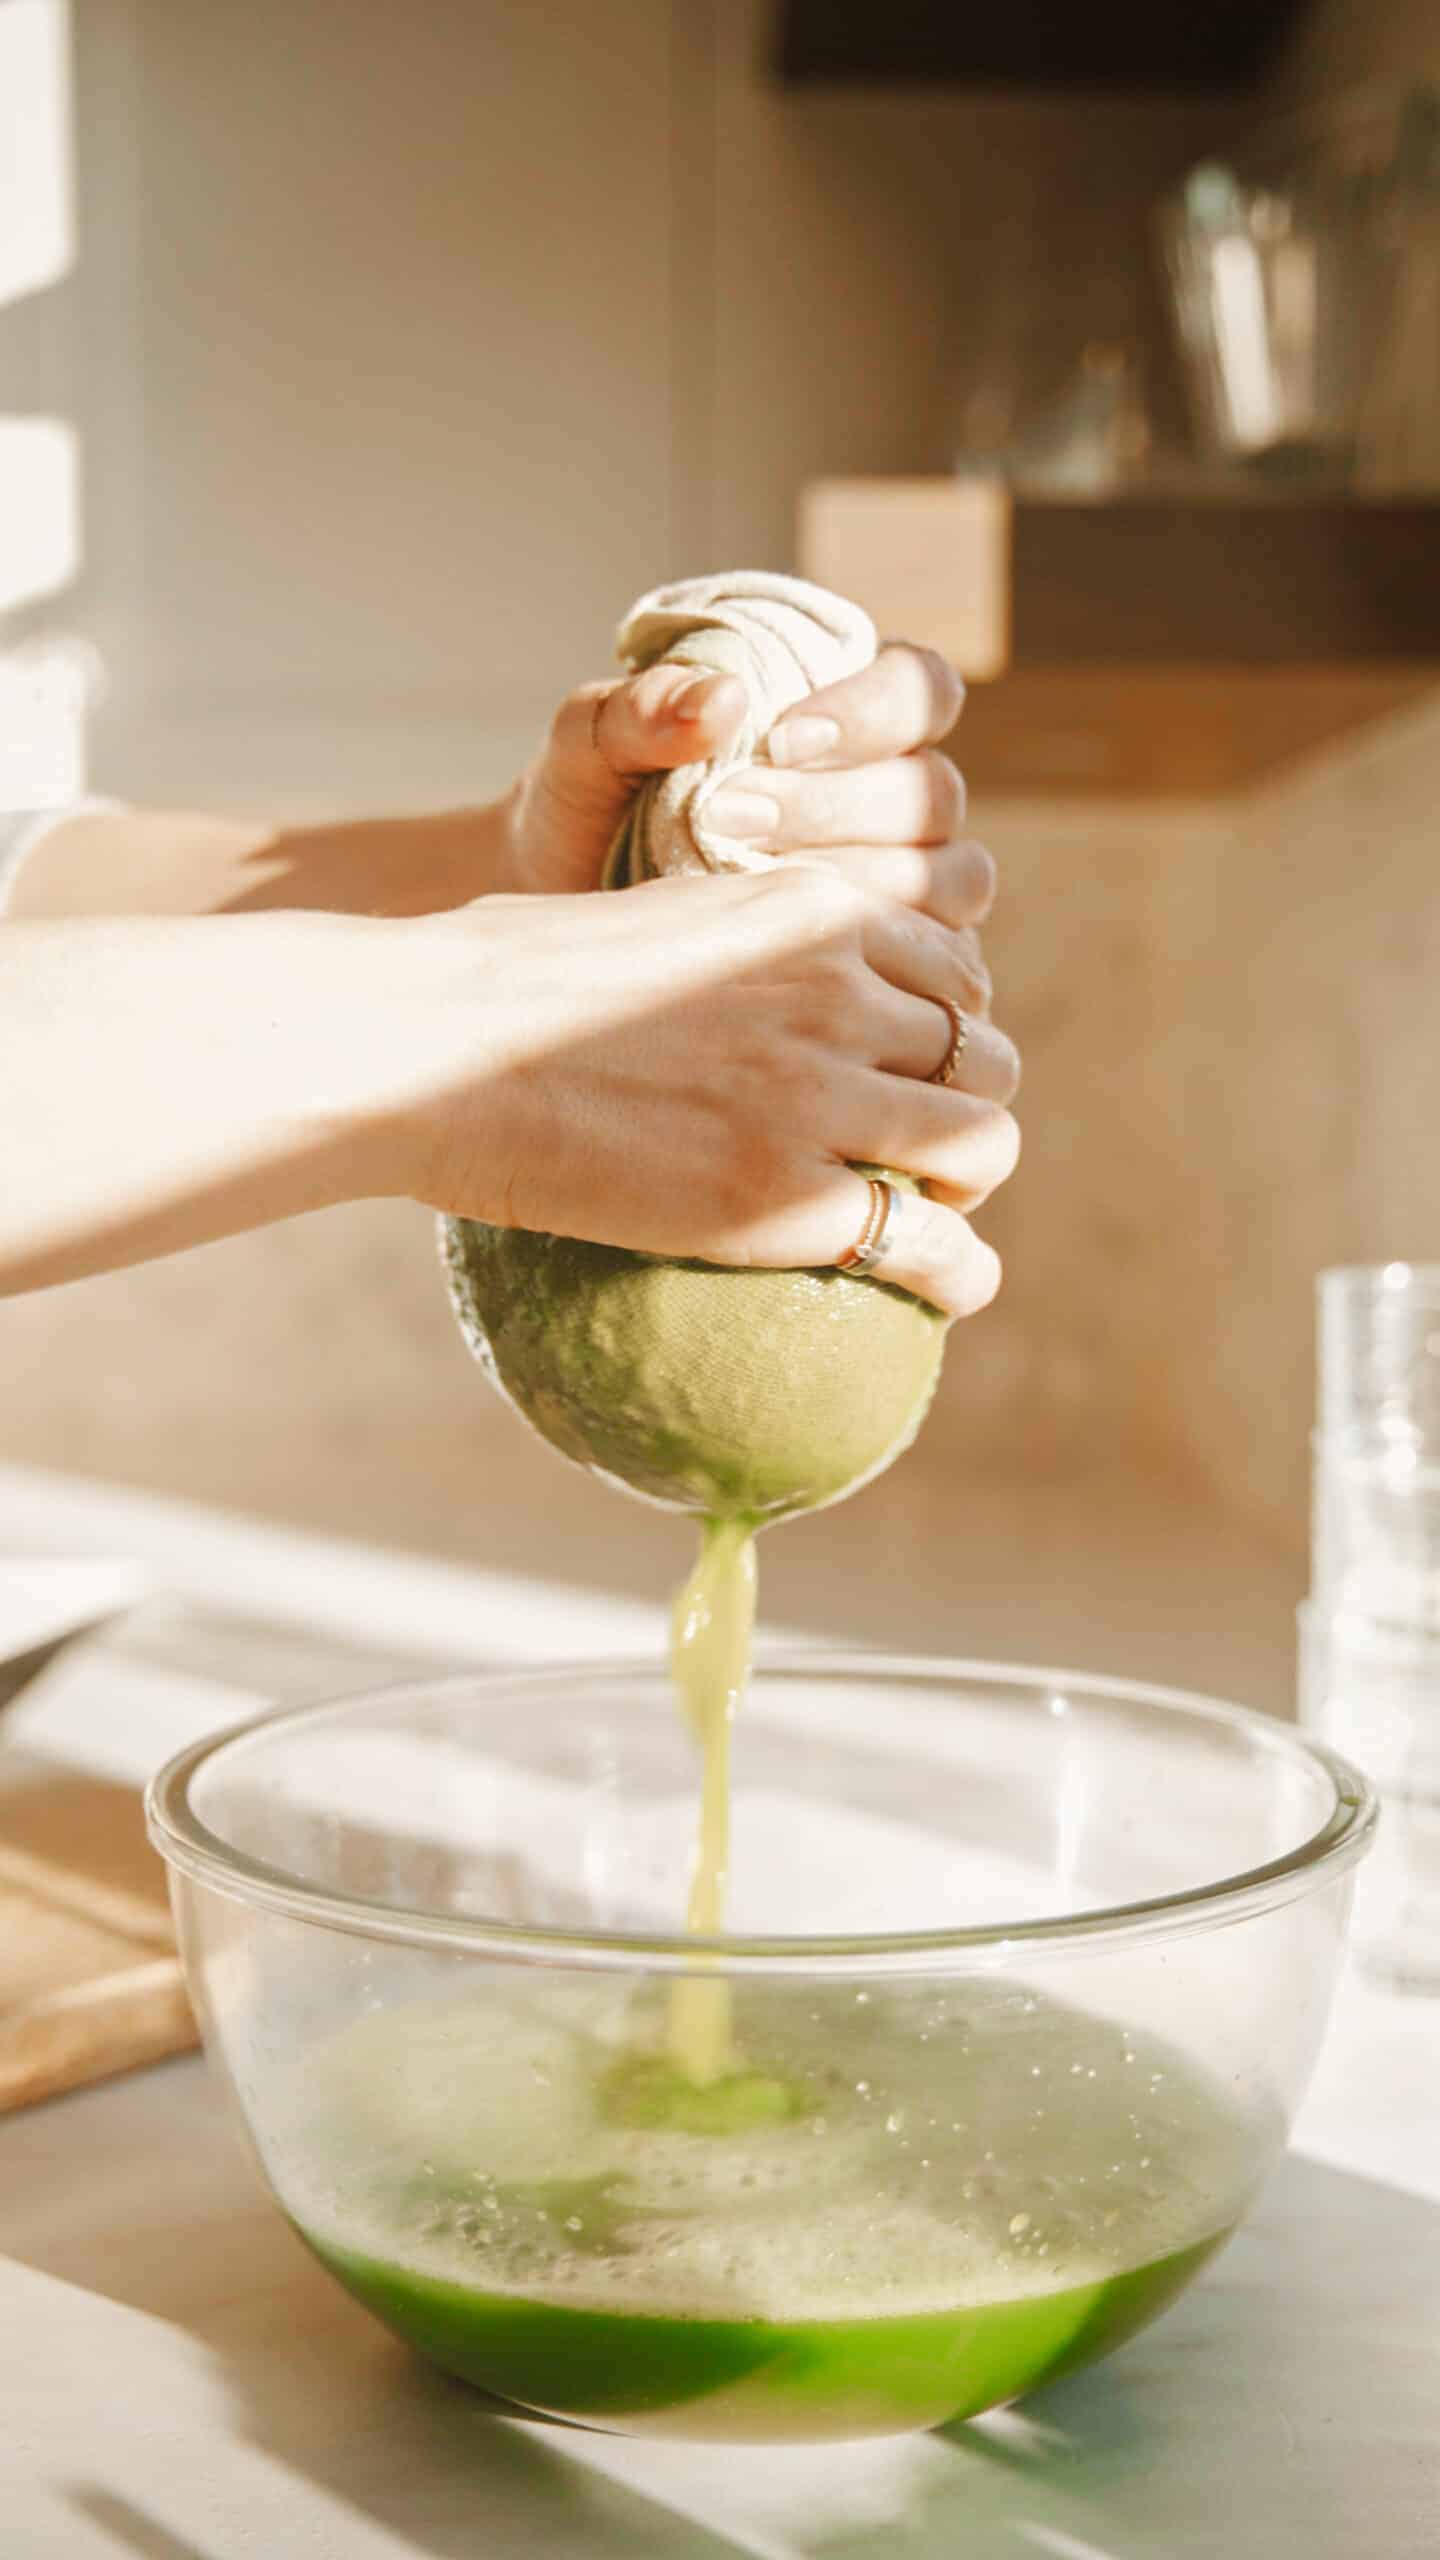 Using a cheesecloth to strain green juice into bowl